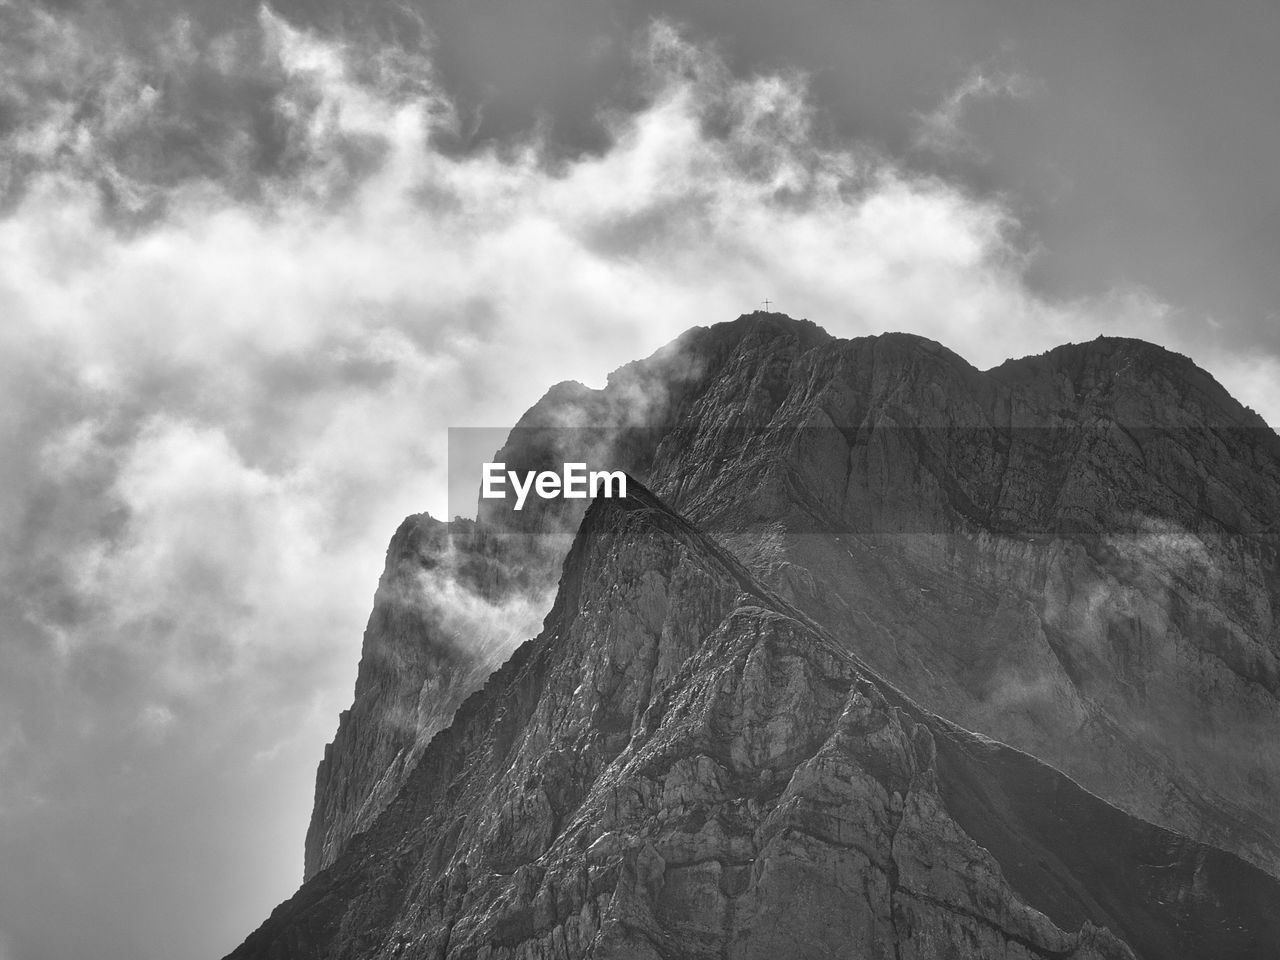 mountain, cloud, black and white, sky, rock, beauty in nature, scenics - nature, environment, landscape, monochrome, monochrome photography, mountain range, nature, land, mountain peak, travel destinations, no people, geology, non-urban scene, travel, outdoors, tranquility, rock formation, darkness, extreme terrain, day, physical geography, tranquil scene